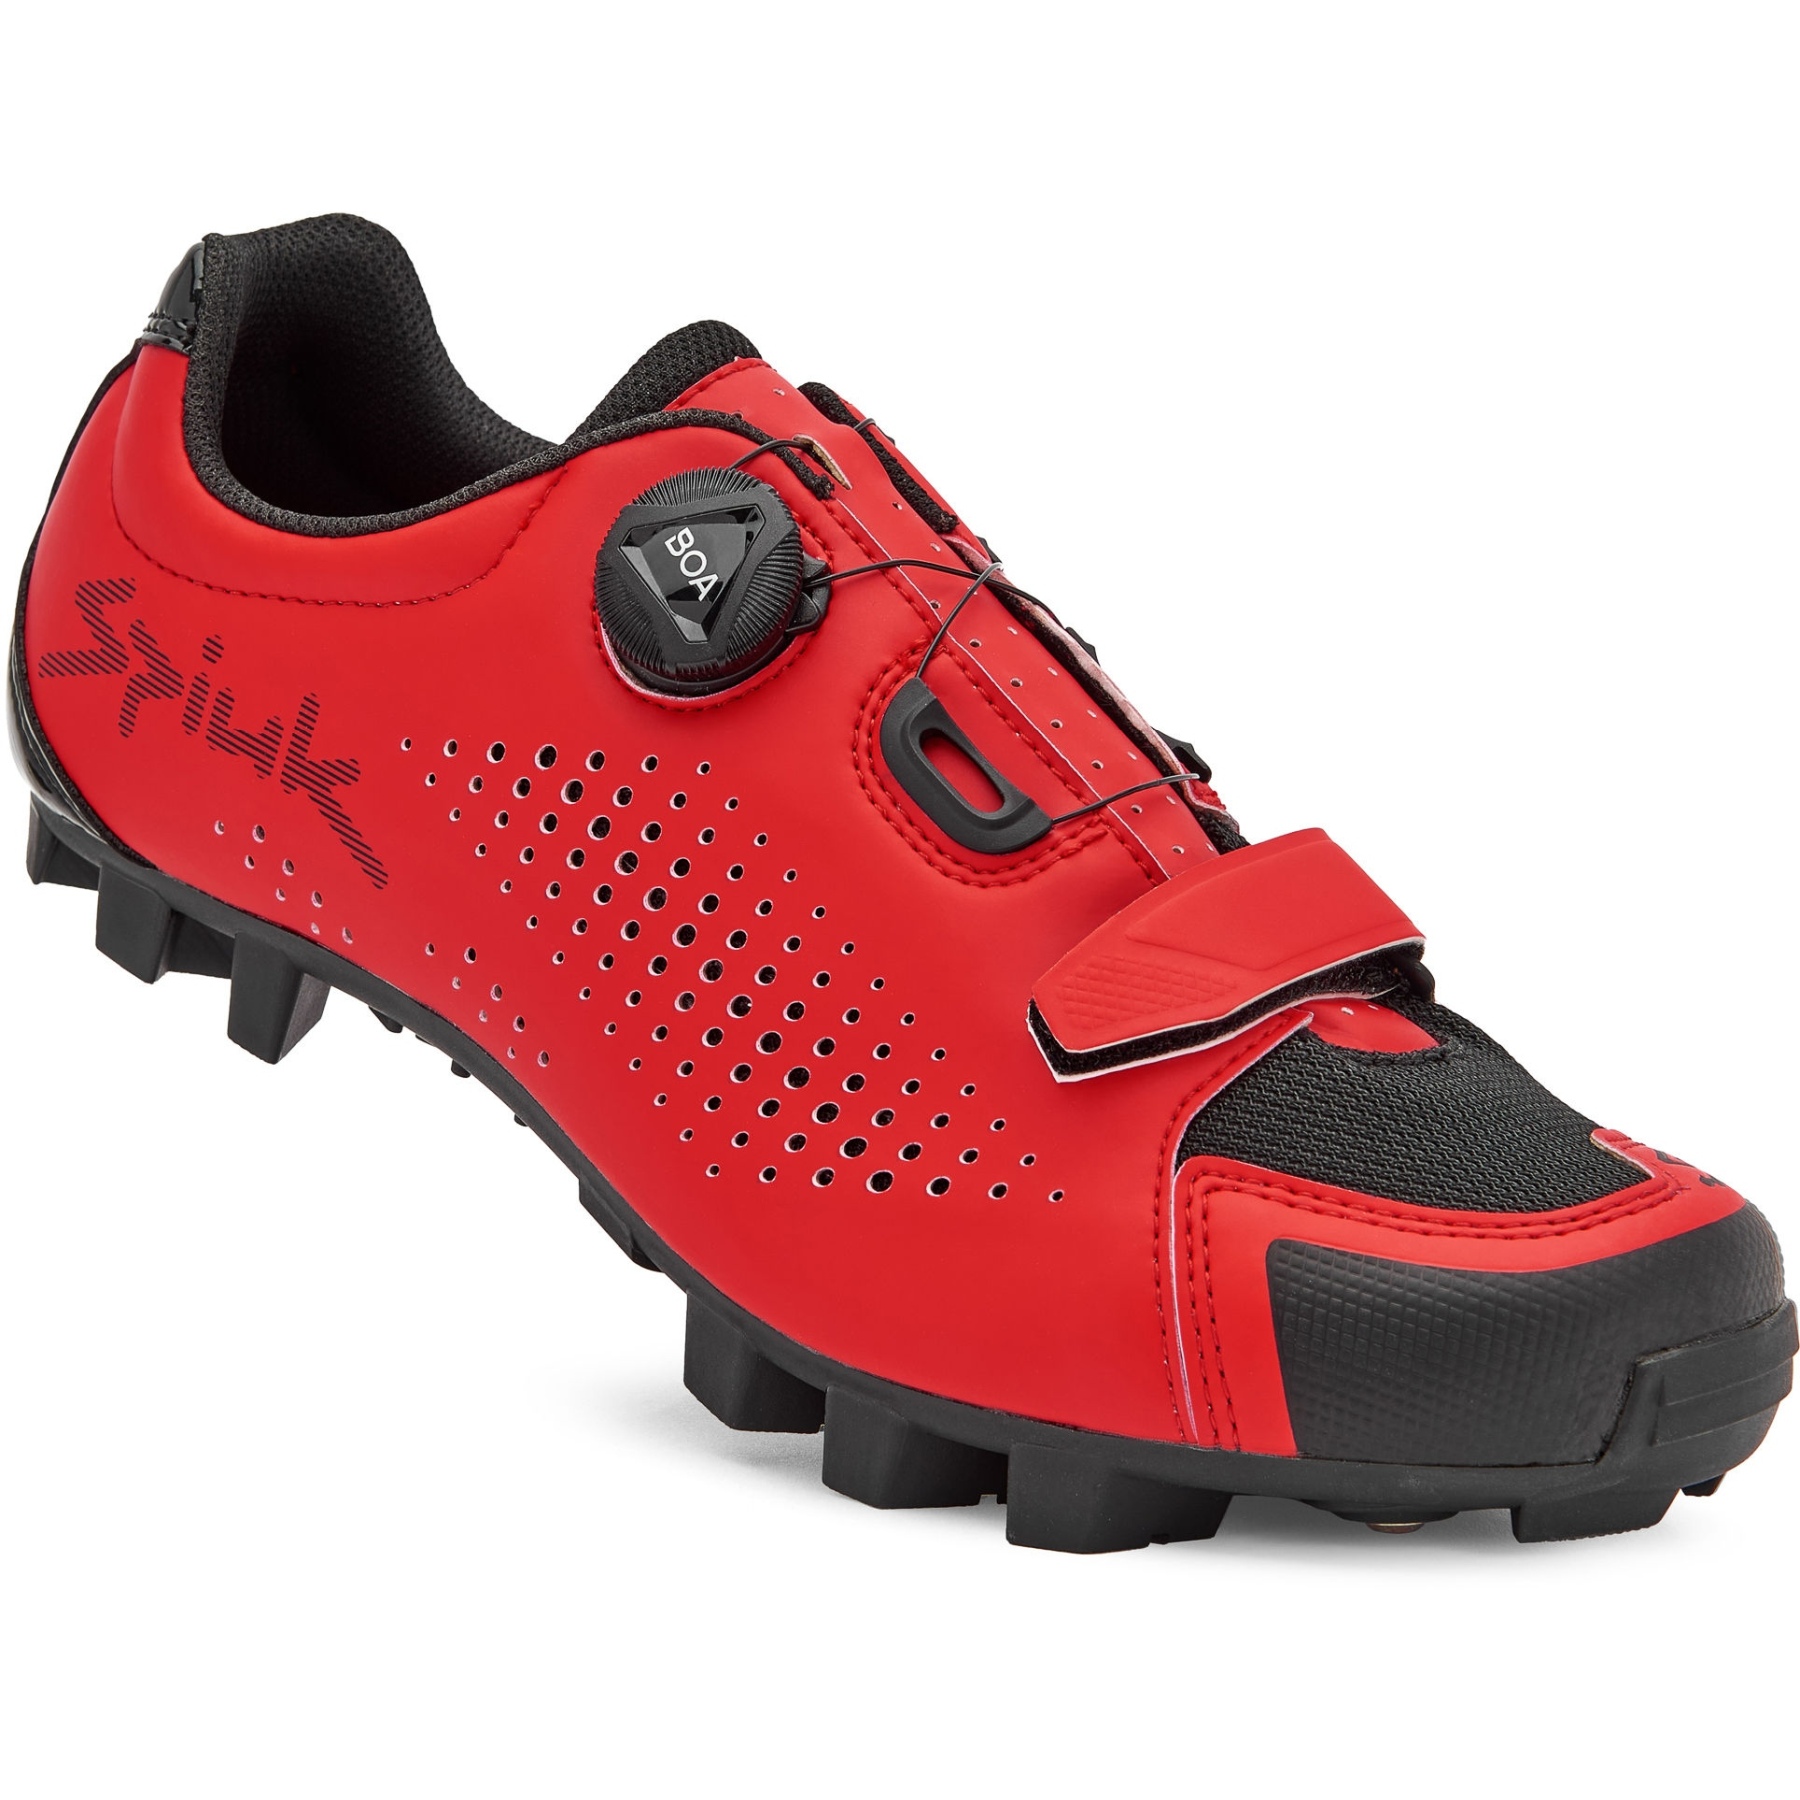 Image of Spiuk Mondie MTB Shoe - red